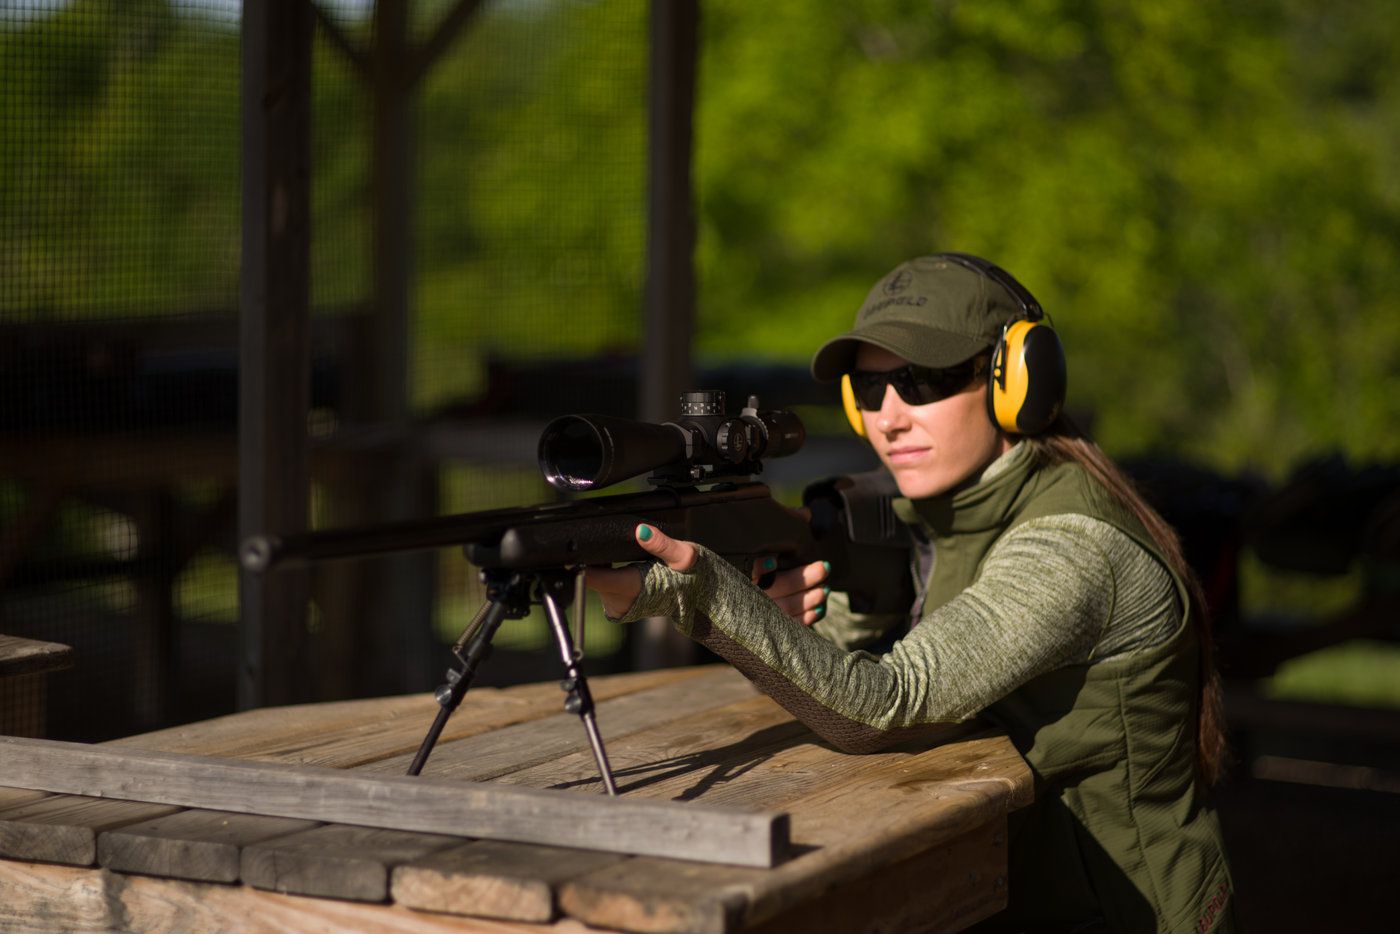 7 Confessions From A New Rifle Shooter That Can Help All Newbies